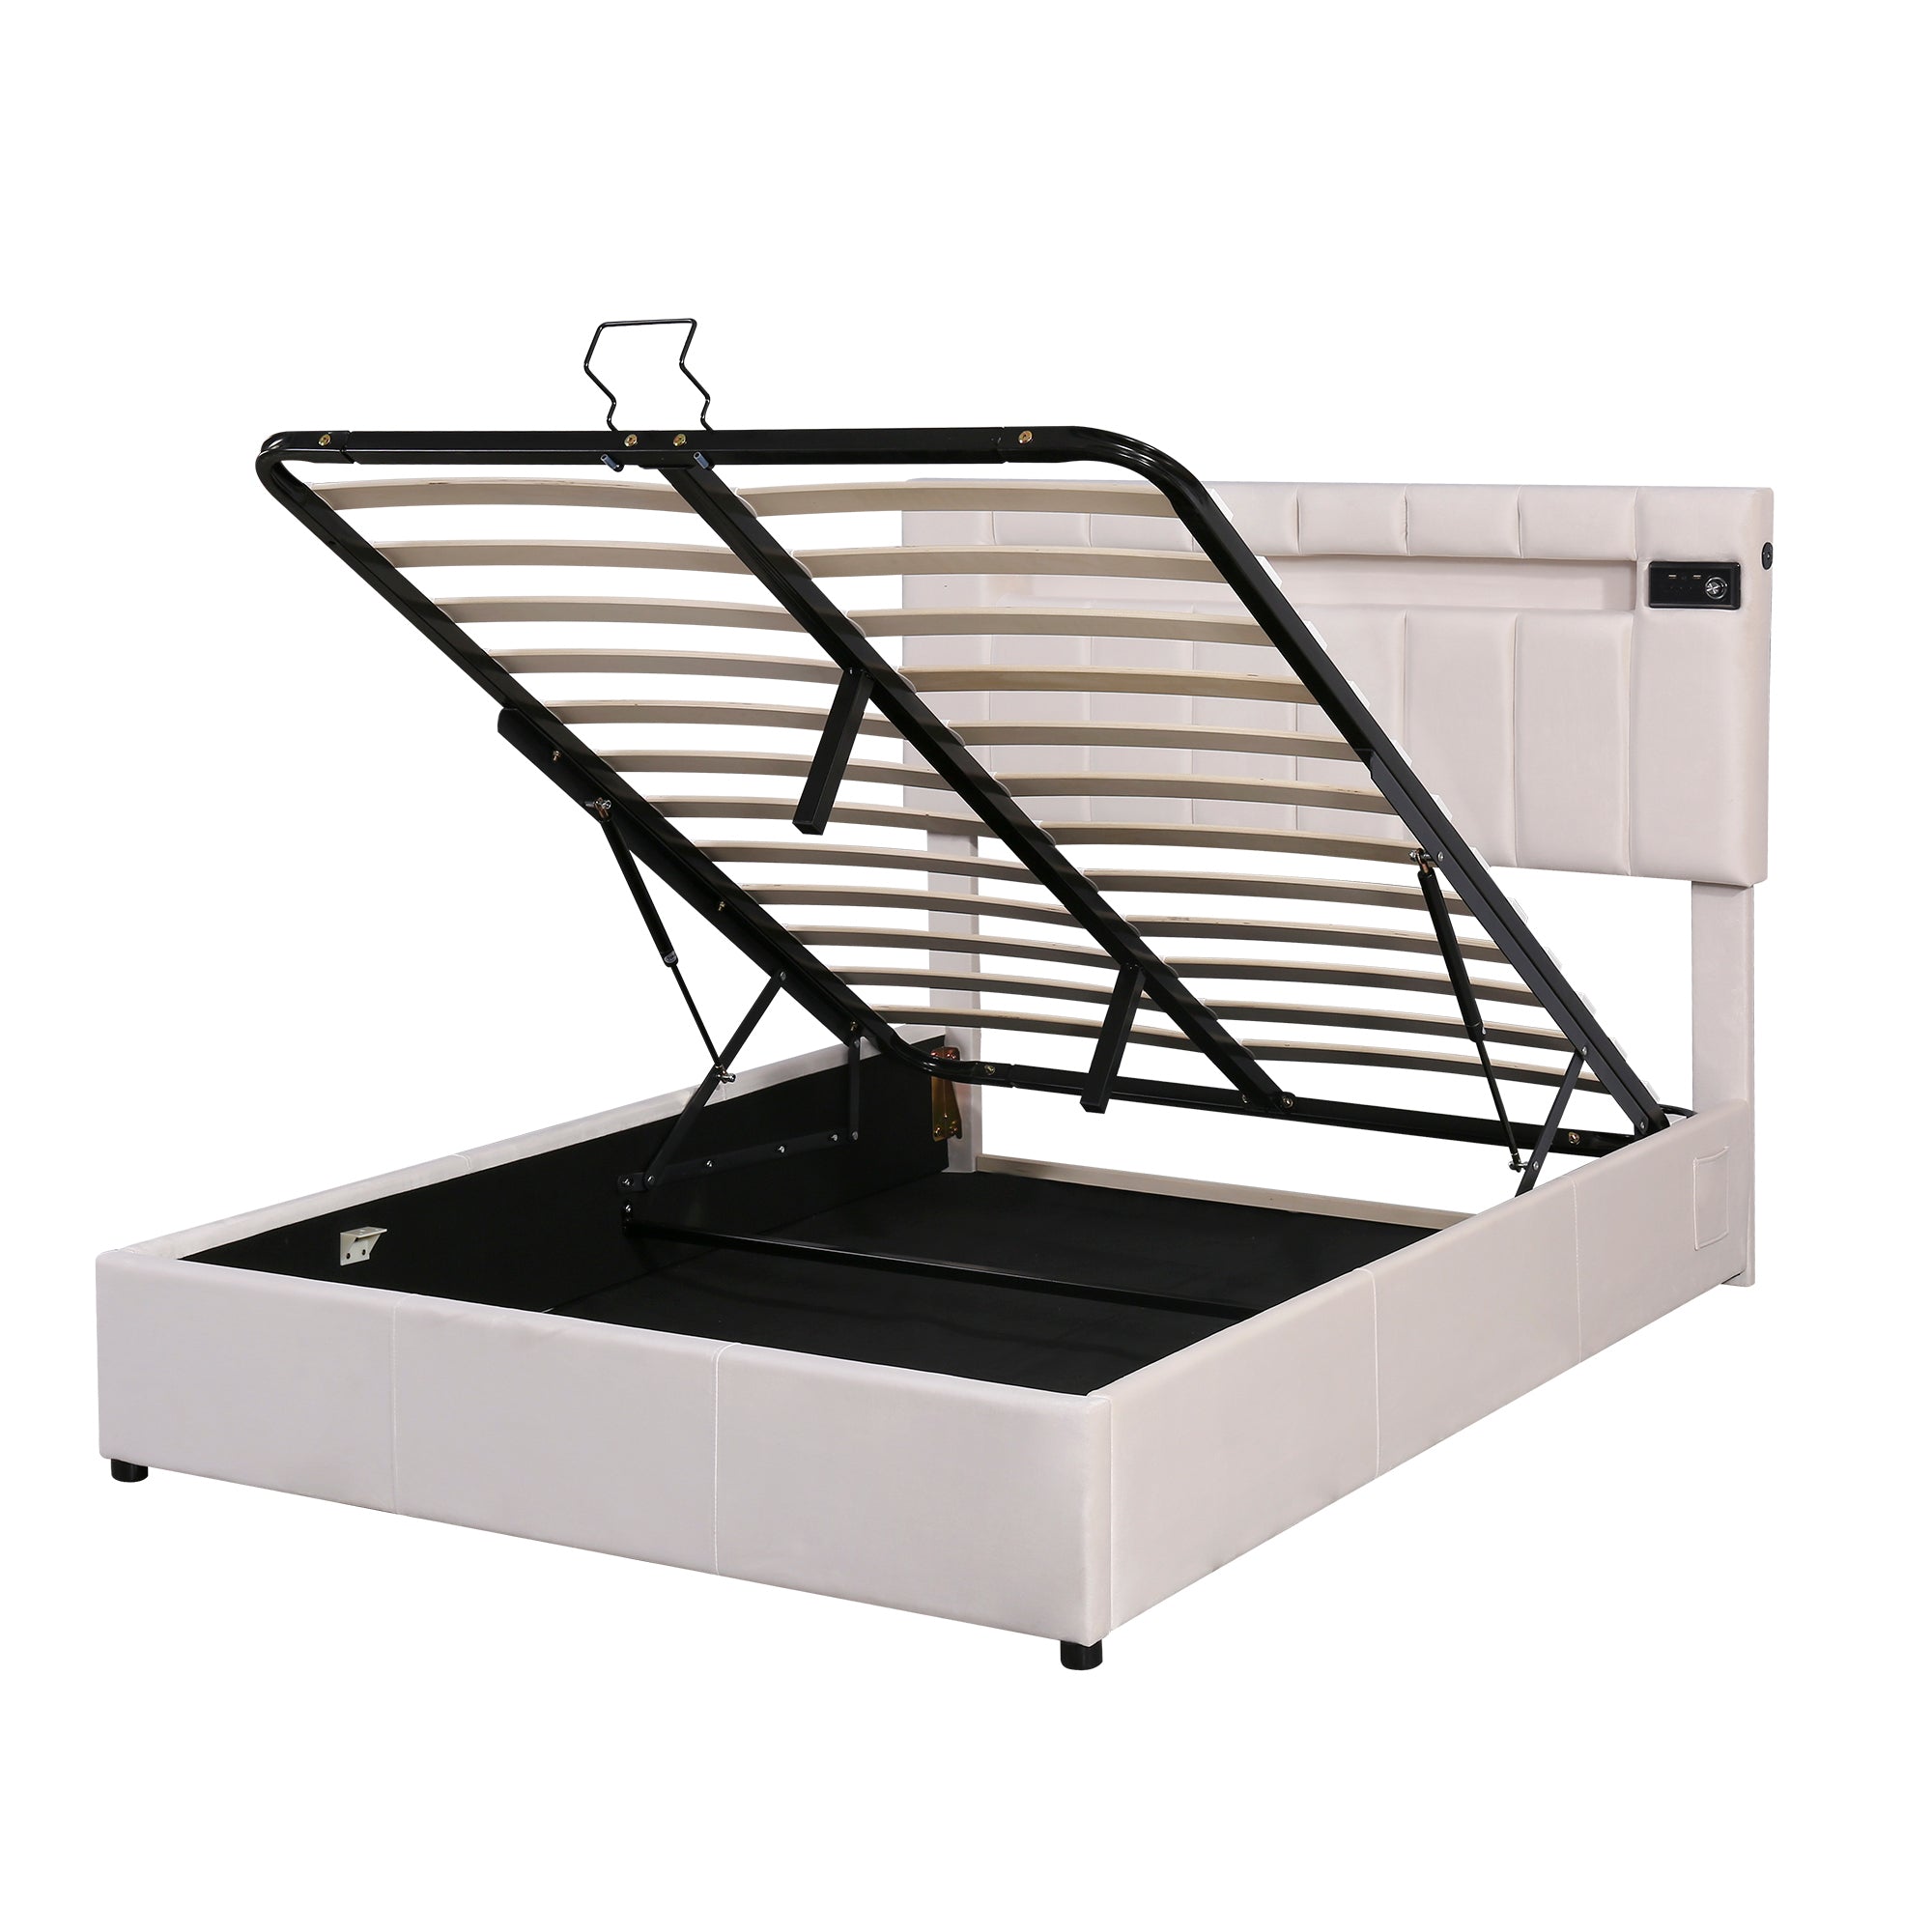 Miami Full Size Velvet Hydraulic Lift Up Storage Platform Bed with LED Light, Bluetooth Player and USB Charging